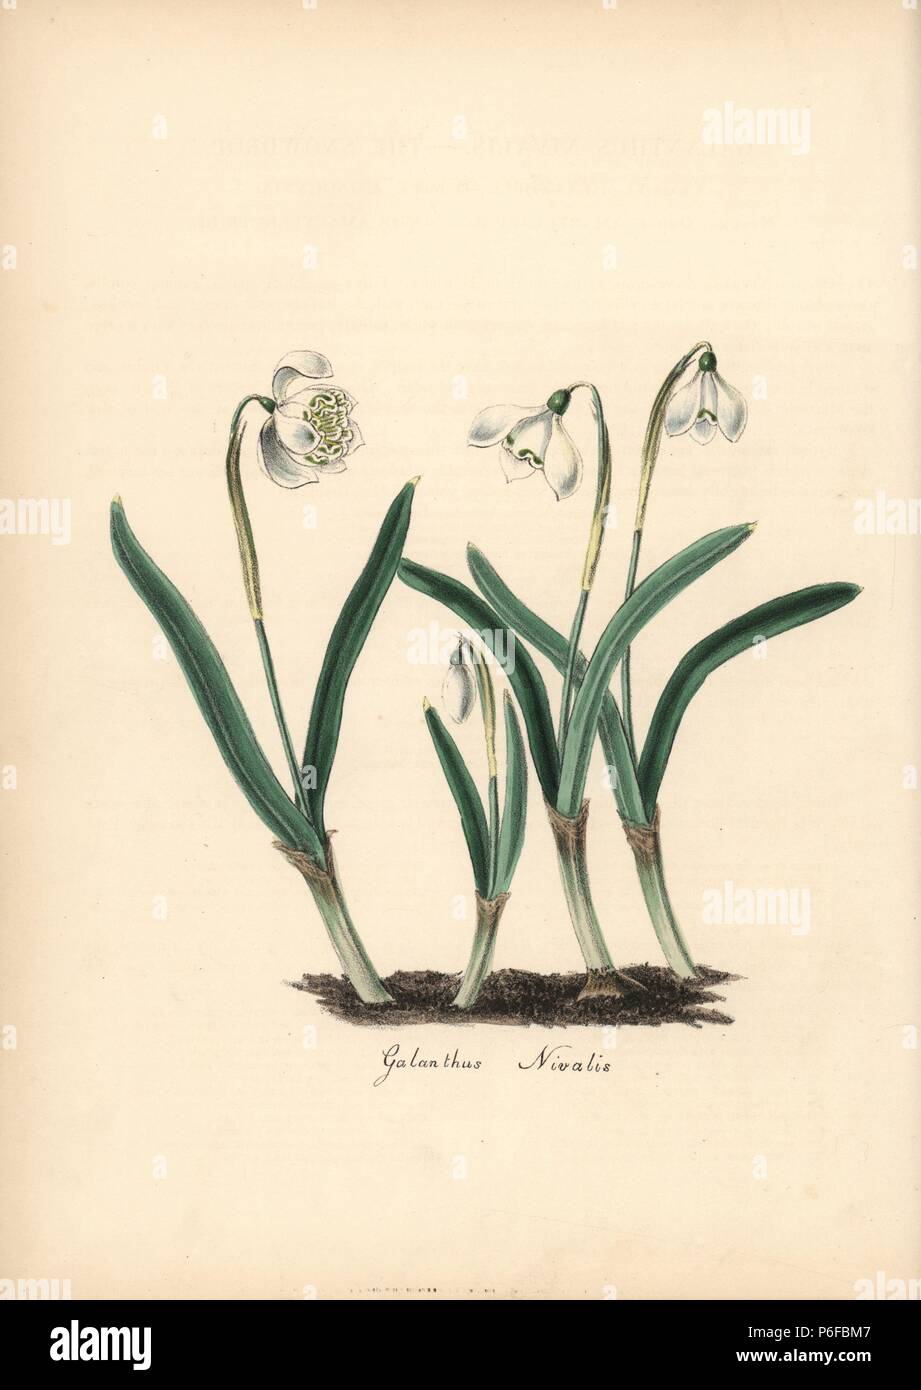 Snowdrop, Galanthus nivalis. Handcoloured zincograph by Chabots drawn by Miss M. A. Burnett from her 'Plantae Utiliores: or Illustrations of Useful Plants,' Whittaker, London, 1842. Miss Burnett drew the botanical illustrations, but the text was chiefly by her late brother, British botanist Gilbert Thomas Burnett (1800-1835). Stock Photo